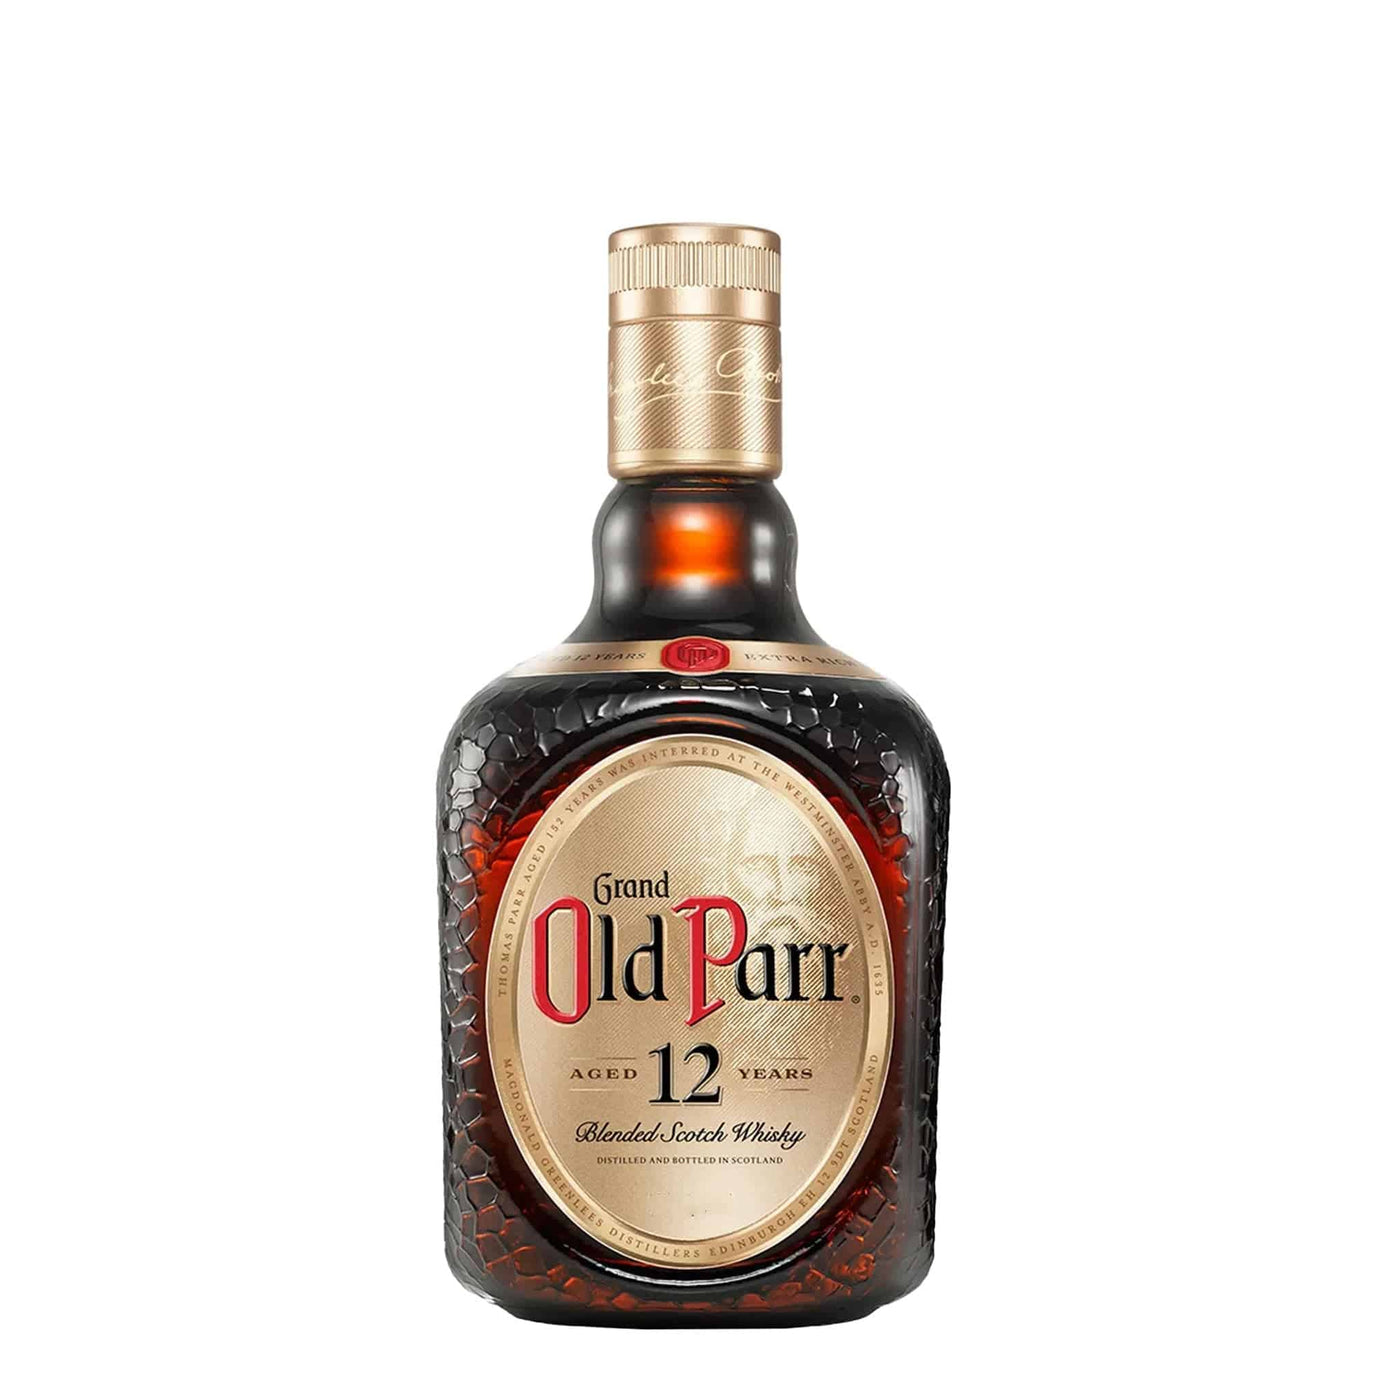 Grand Old Parr 12 Years Whisky - Spiritly